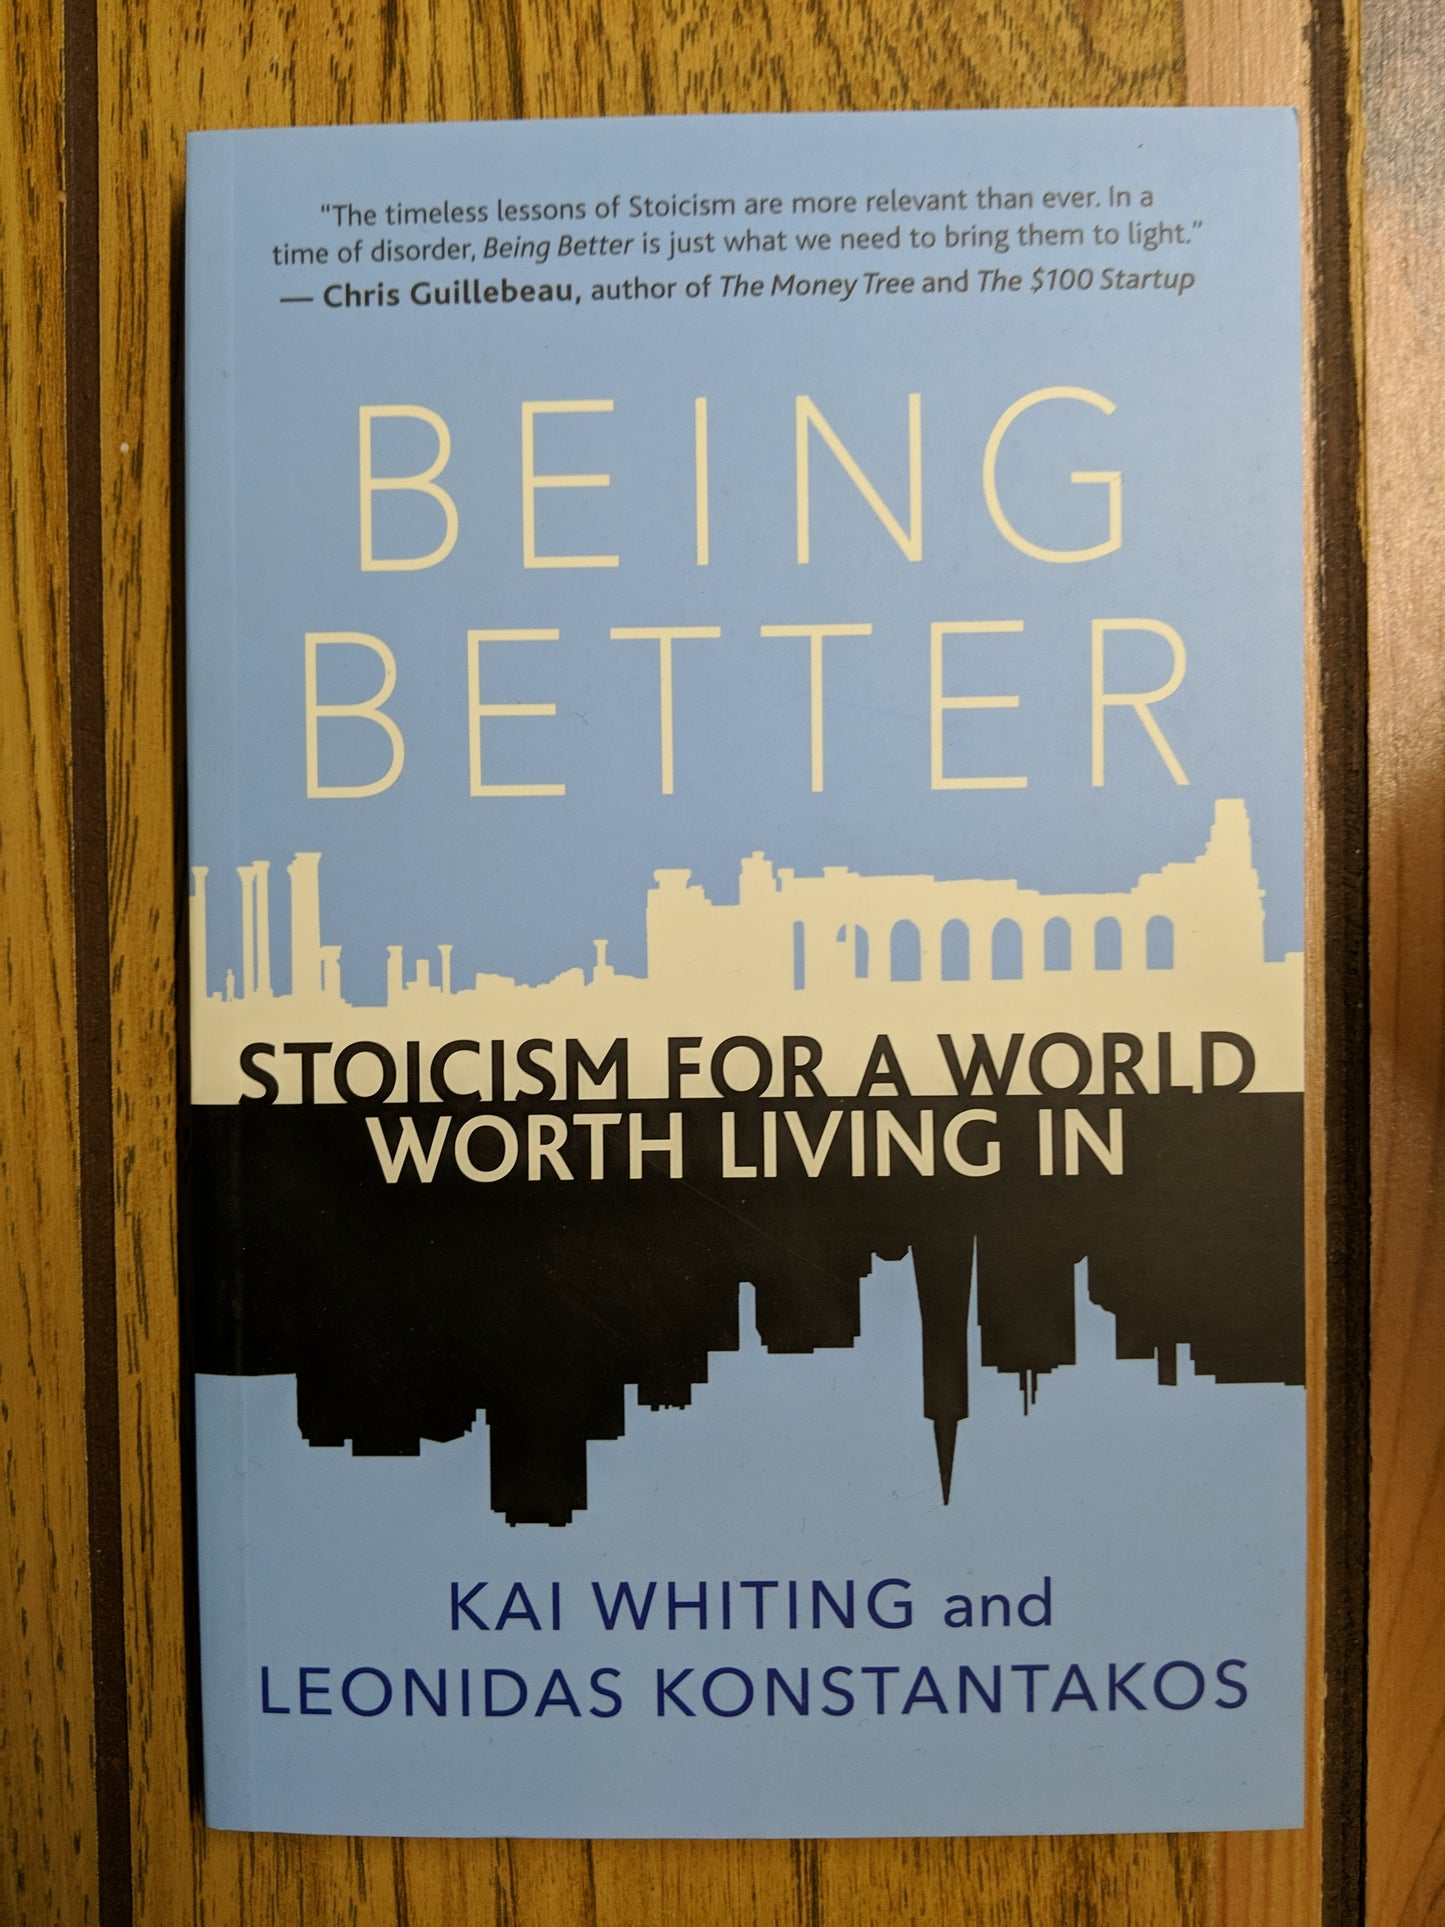 Being Better: Stoicism for a World Worth Living In